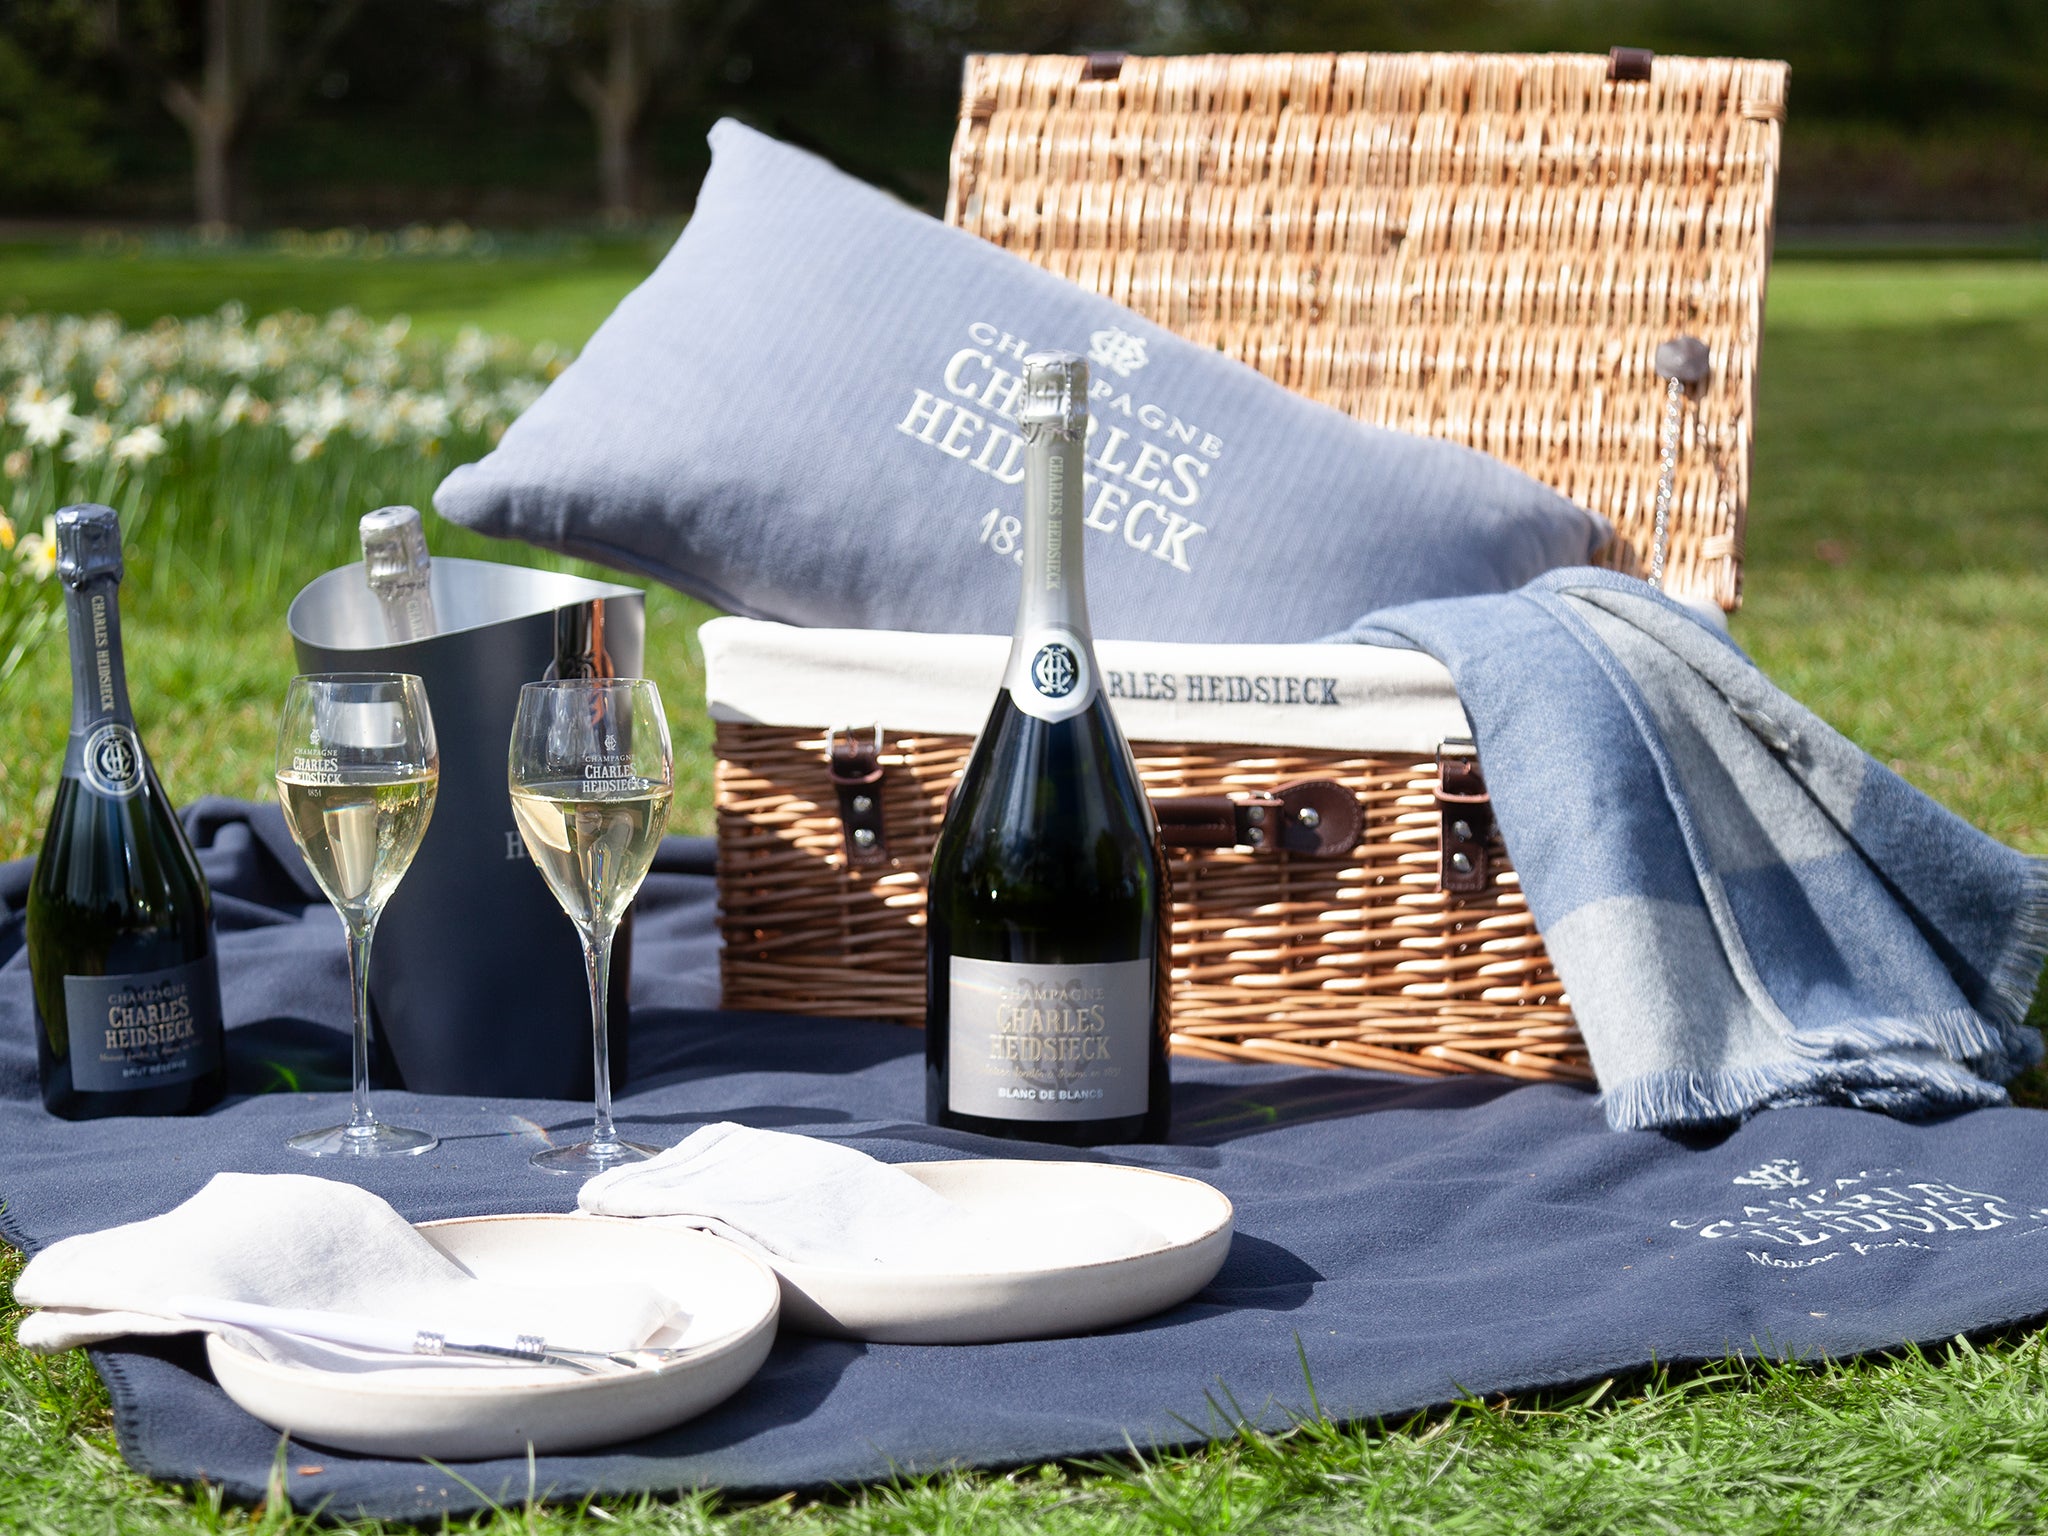 The Charles Heidsieck luxury hamper comes with the ‘Where Chefs Picnic’ guidebook